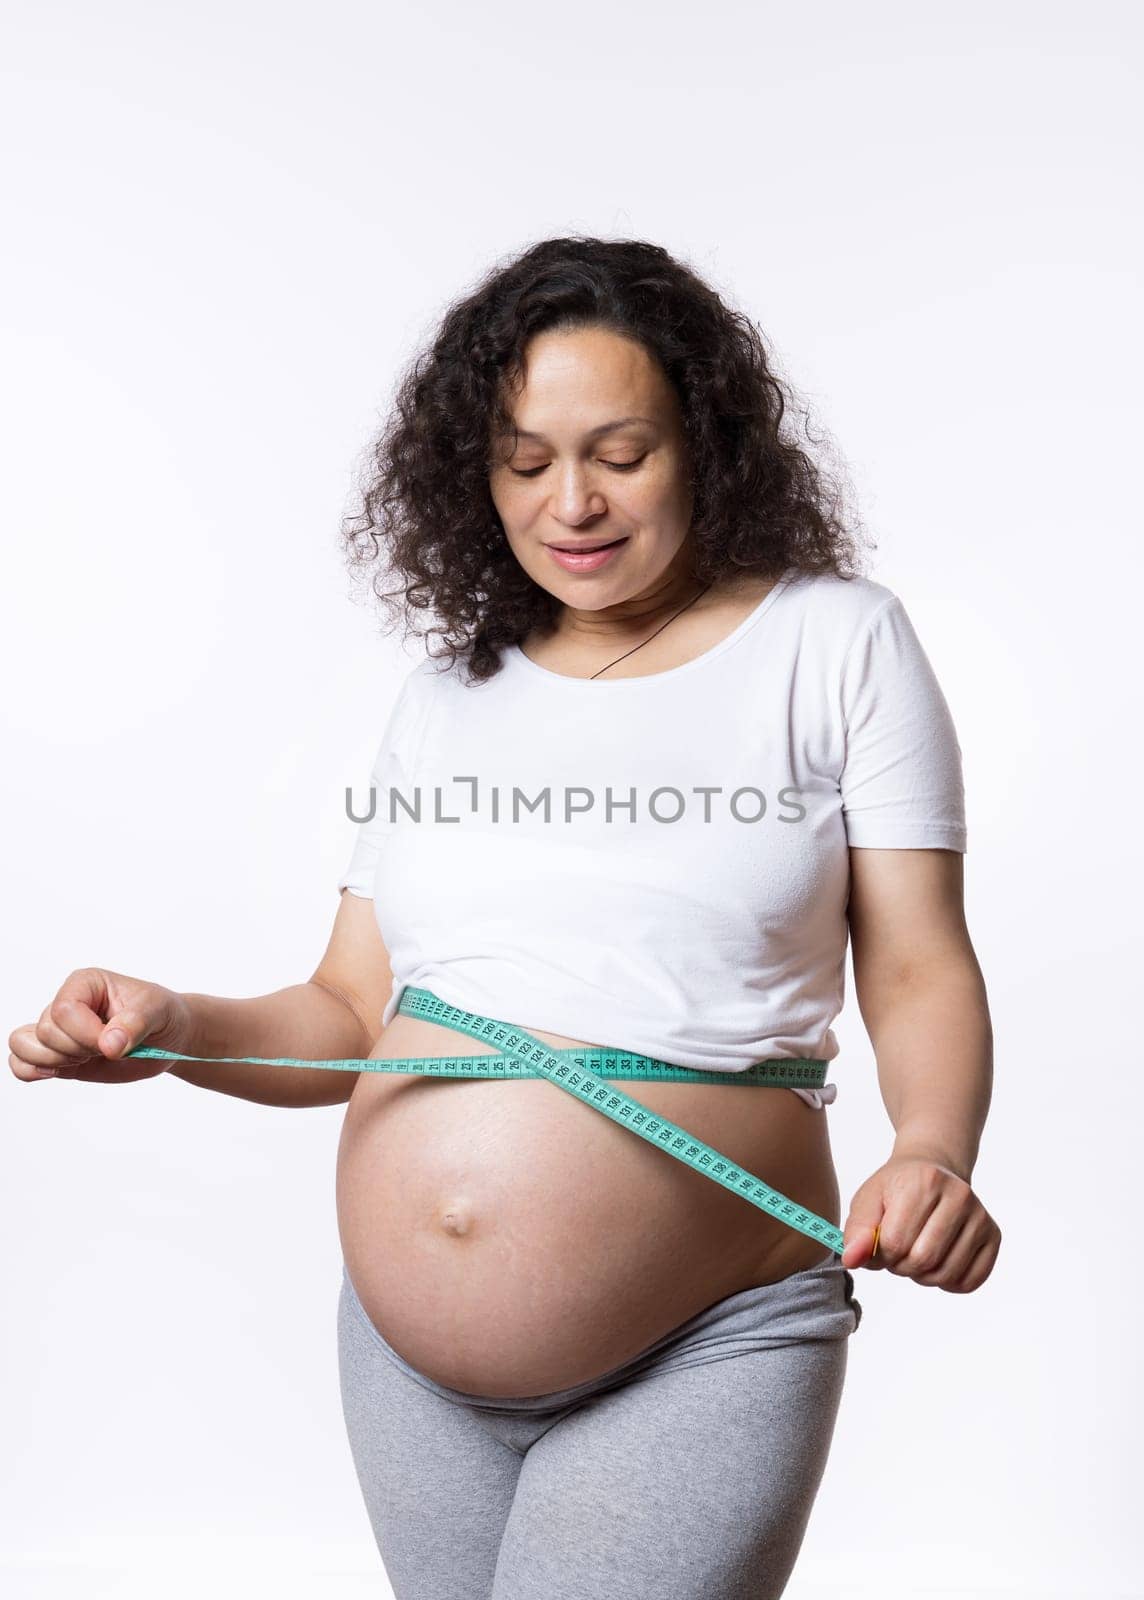 Studio portrait adult pregnant woman monitoring the development of her baby in womb, measuring her big belly with a tape by artgf